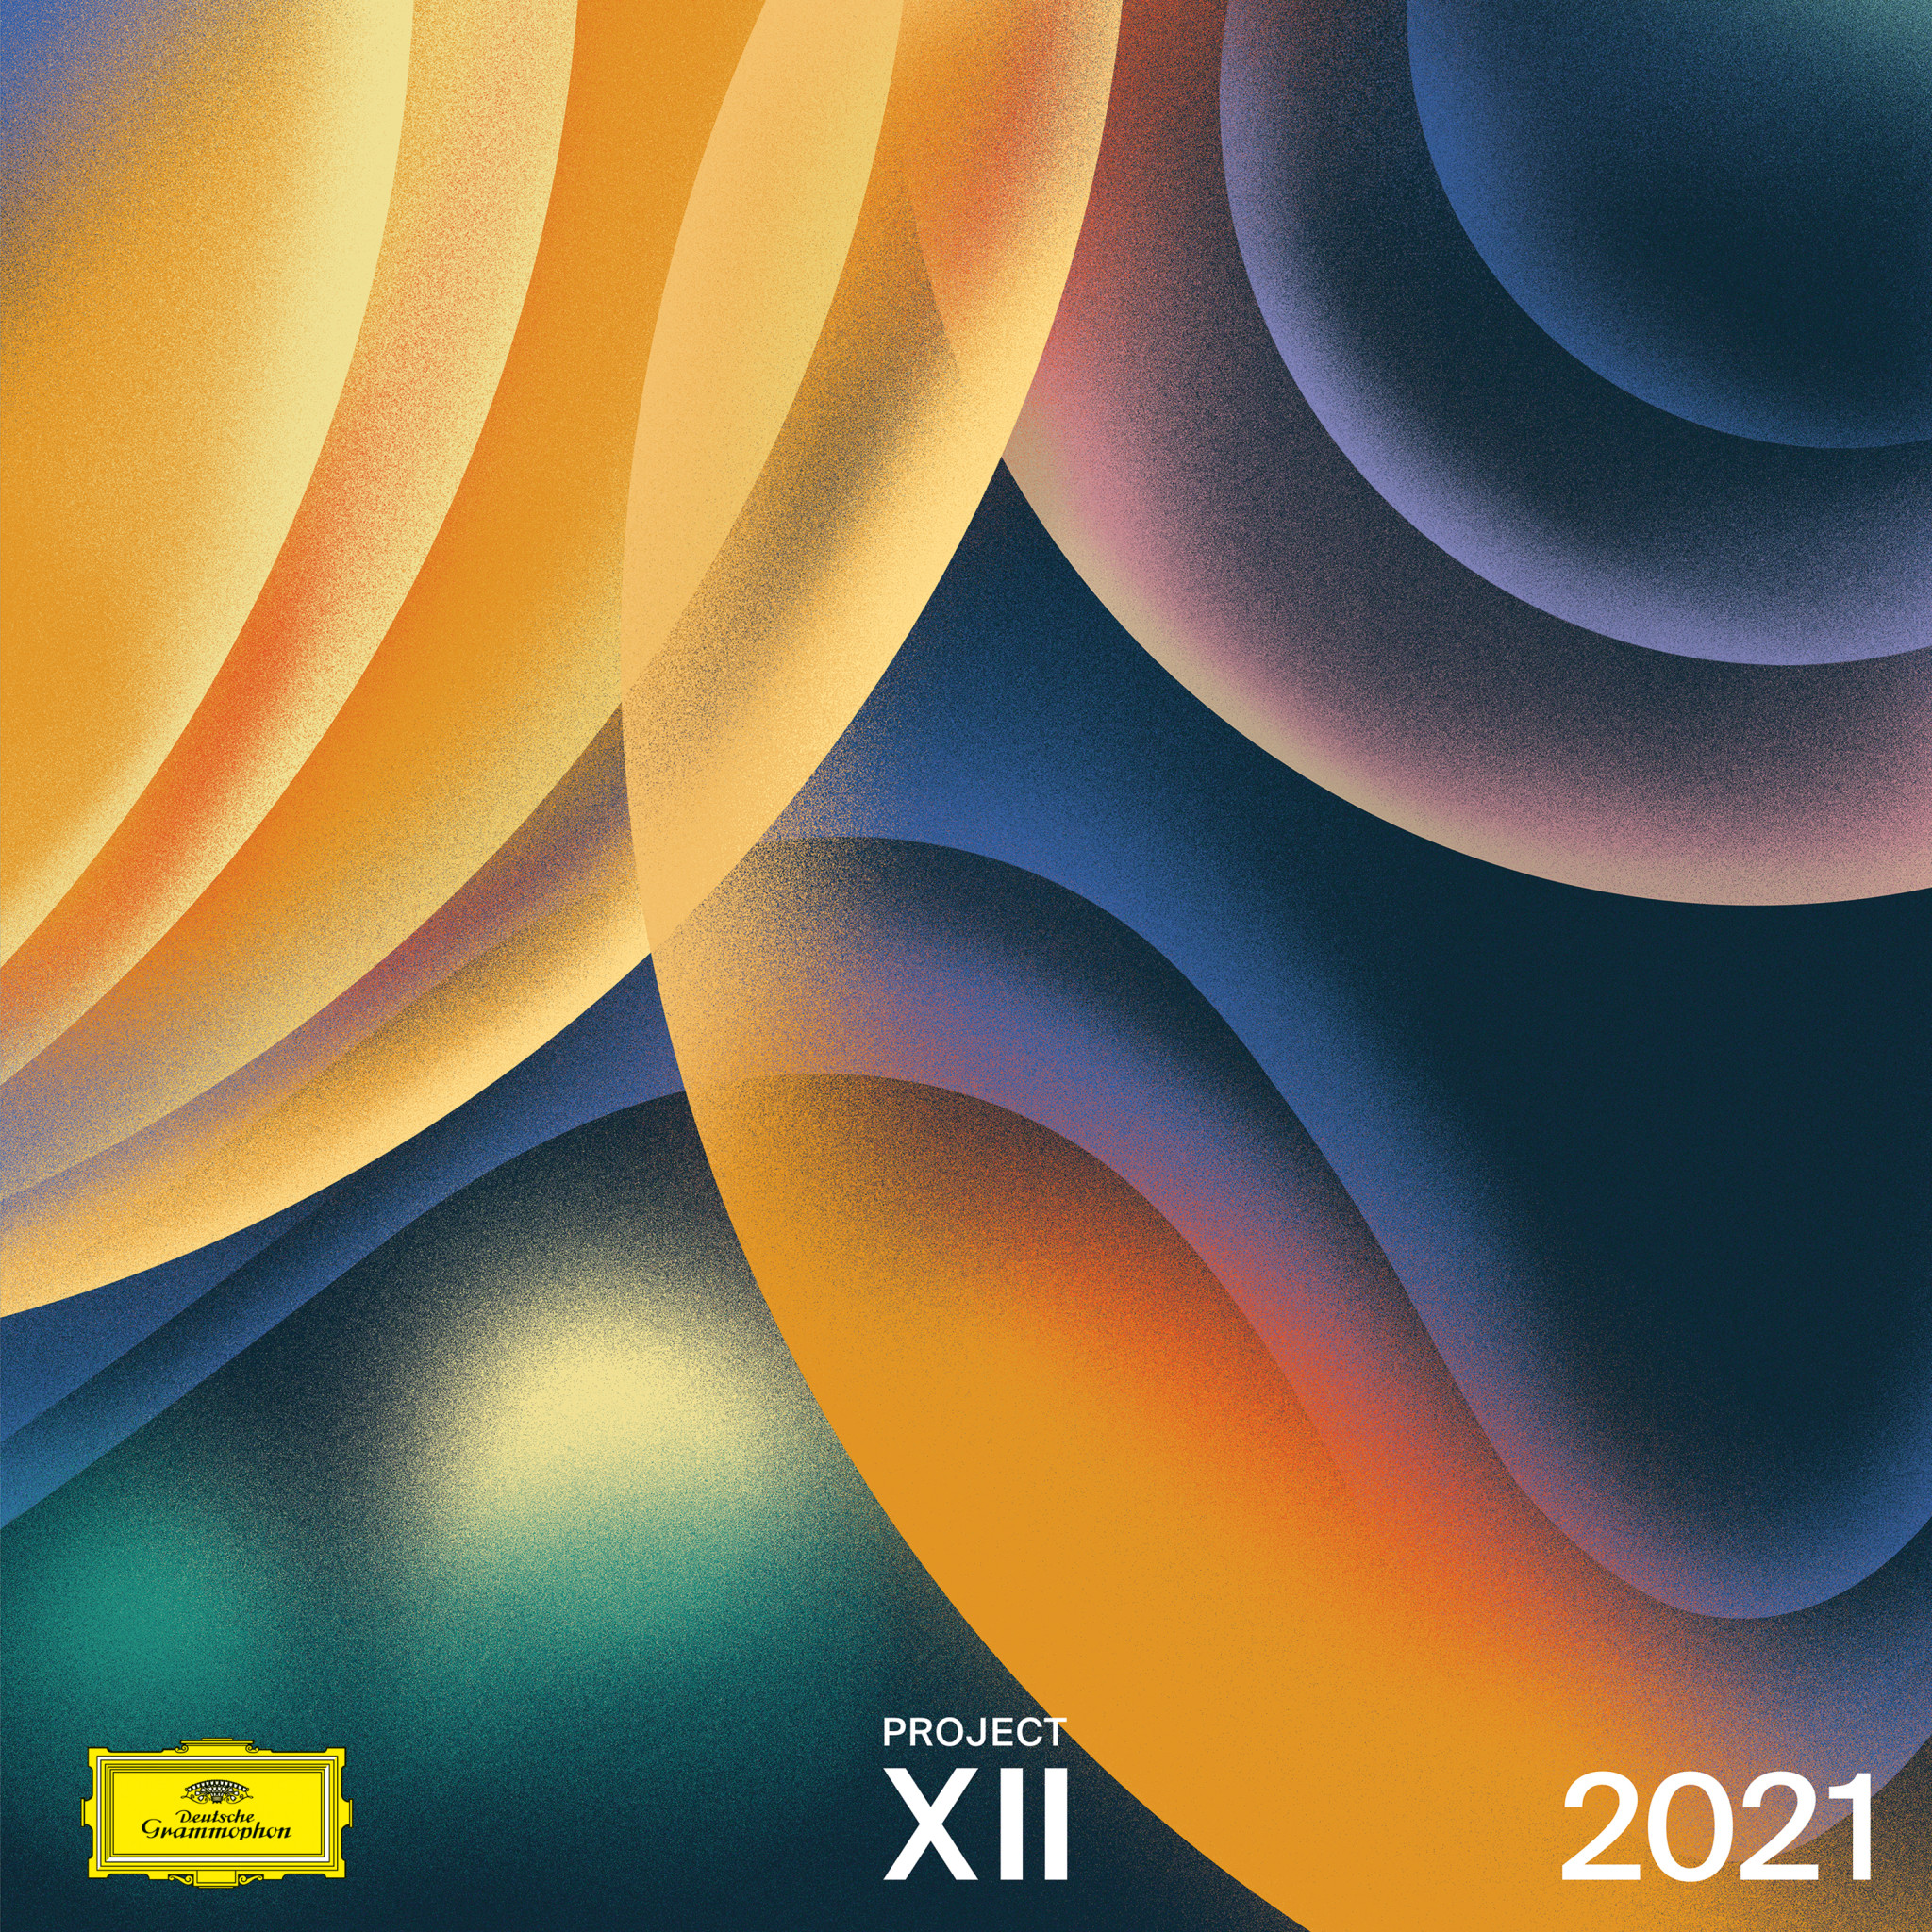 PROJECT XII 2021